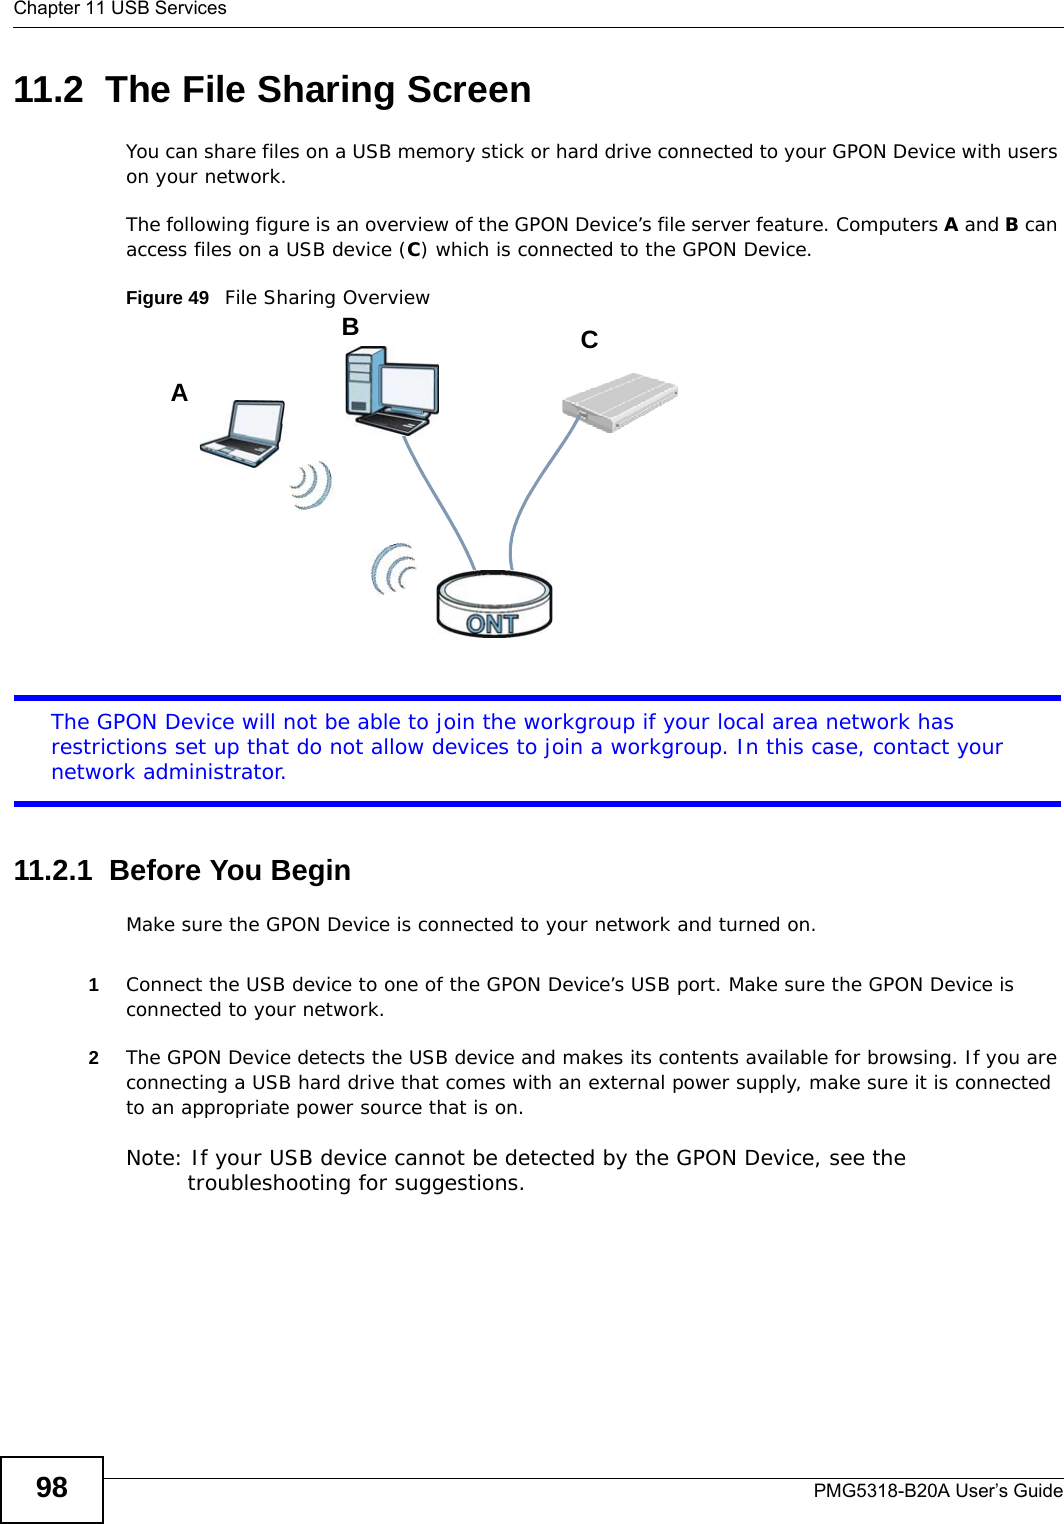 Chapter 11 USB ServicesPMG5318-B20A User’s Guide9811.2  The File Sharing ScreenYou can share files on a USB memory stick or hard drive connected to your GPON Device with users on your network. The following figure is an overview of the GPON Device’s file server feature. Computers A and B can access files on a USB device (C) which is connected to the GPON Device.Figure 49   File Sharing OverviewThe GPON Device will not be able to join the workgroup if your local area network has restrictions set up that do not allow devices to join a workgroup. In this case, contact your network administrator.11.2.1  Before You BeginMake sure the GPON Device is connected to your network and turned on.1Connect the USB device to one of the GPON Device’s USB port. Make sure the GPON Device is connected to your network.2The GPON Device detects the USB device and makes its contents available for browsing. If you are connecting a USB hard drive that comes with an external power supply, make sure it is connected to an appropriate power source that is on.Note: If your USB device cannot be detected by the GPON Device, see the troubleshooting for suggestions. ABC